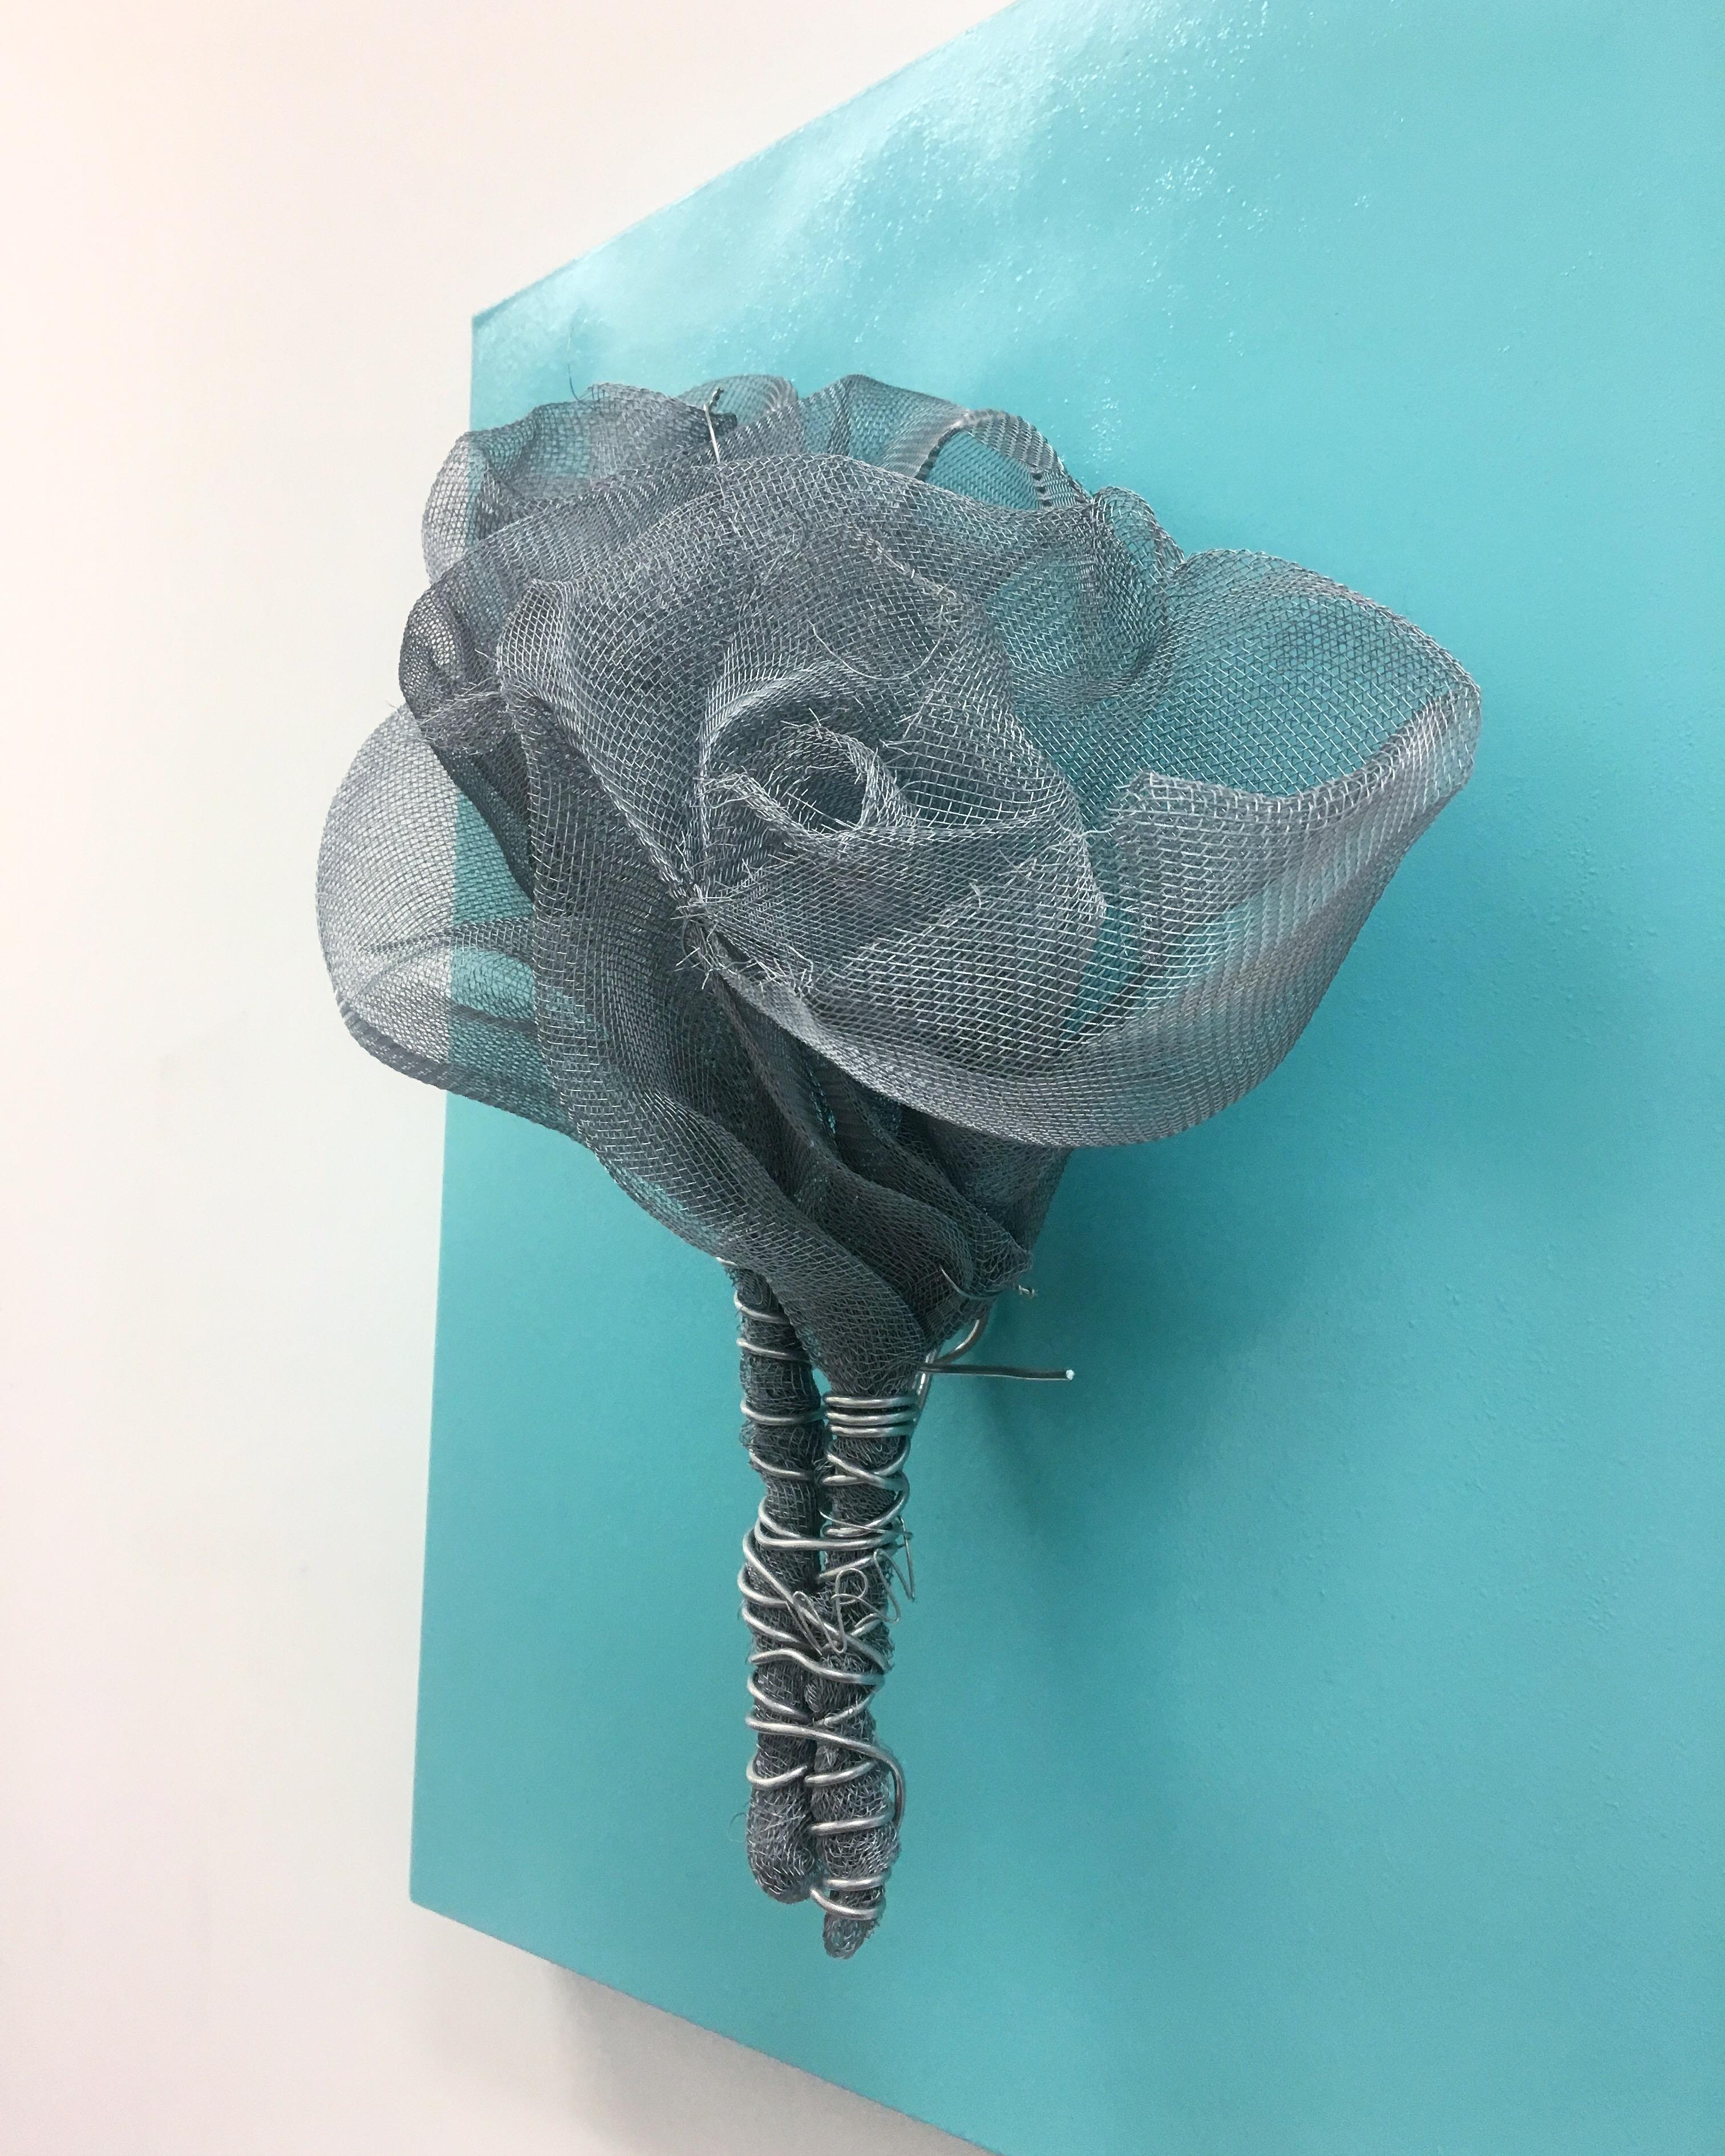 ROSES DELICIOUS sculpture by Melanie Newcombe 9